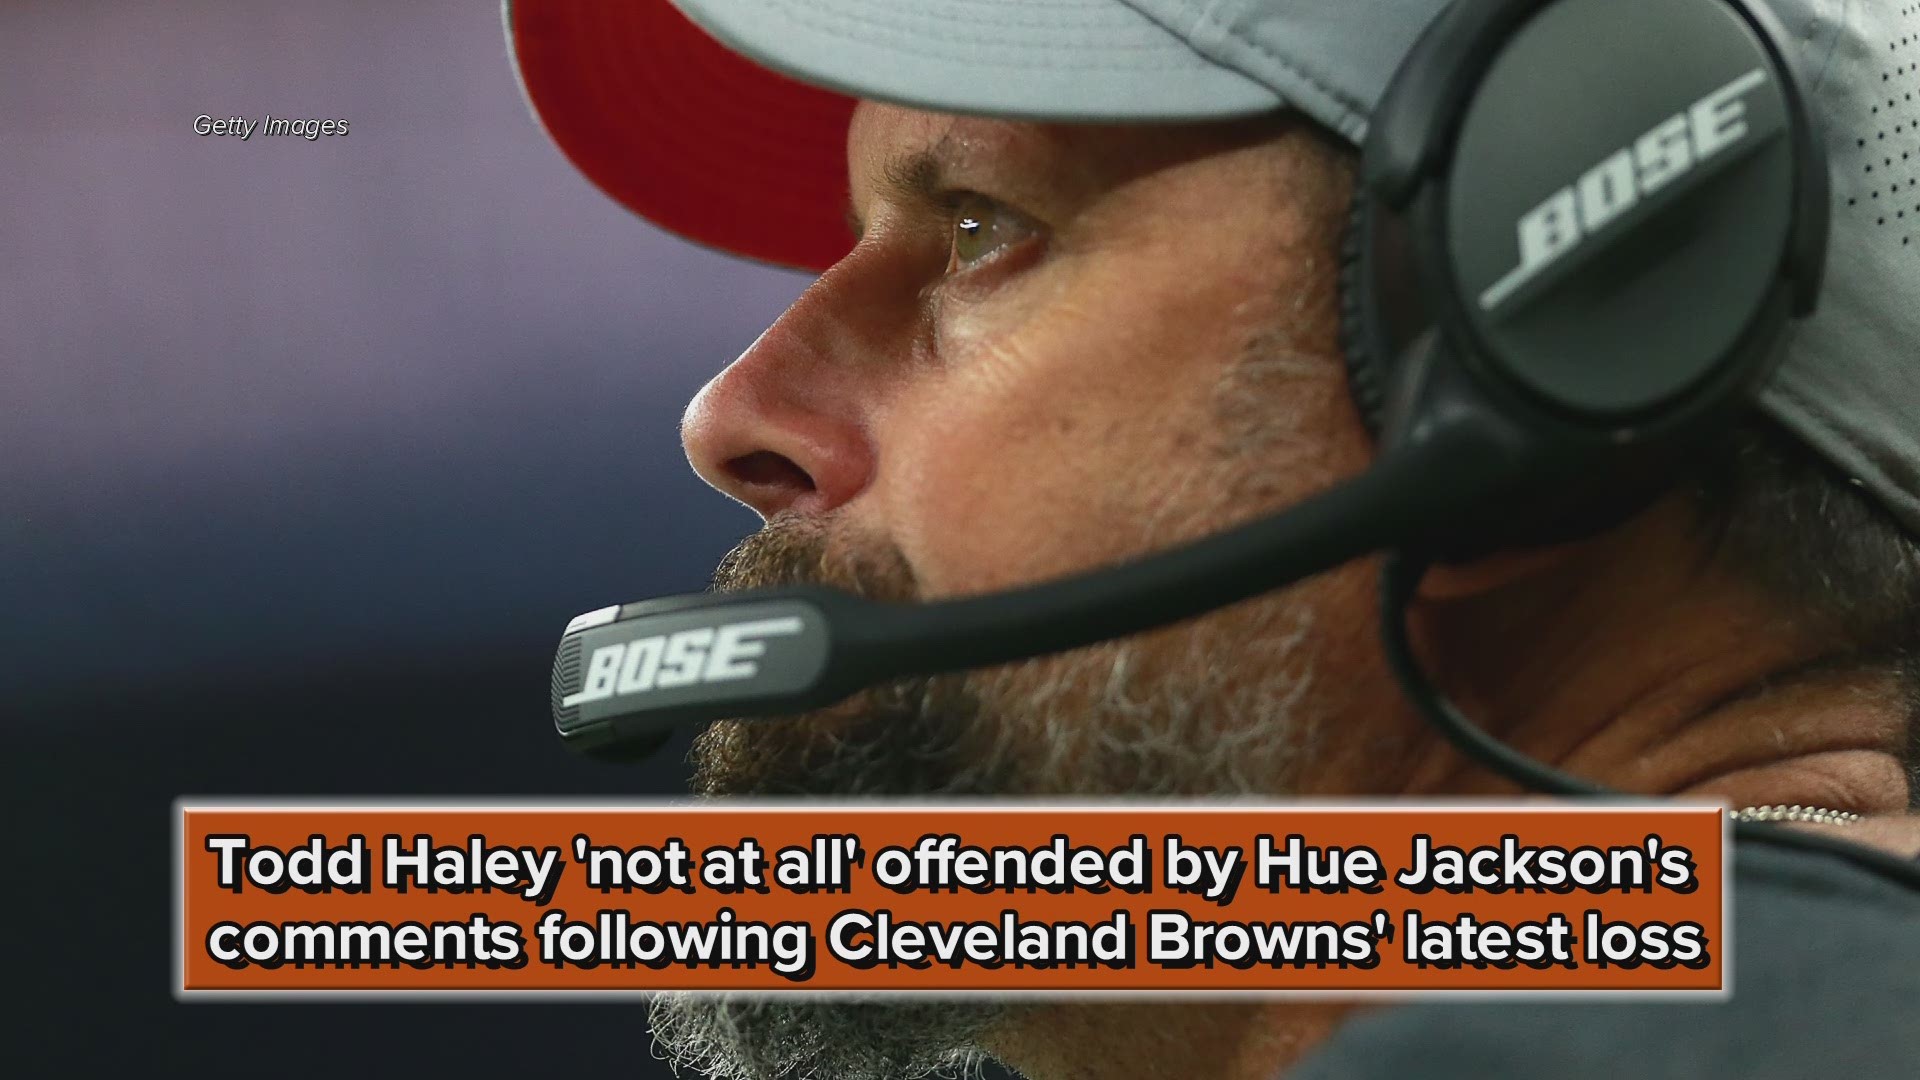 Todd Haley 'not at all' offended by Hue Jackson's comments following Cleveland Browns' latest loss